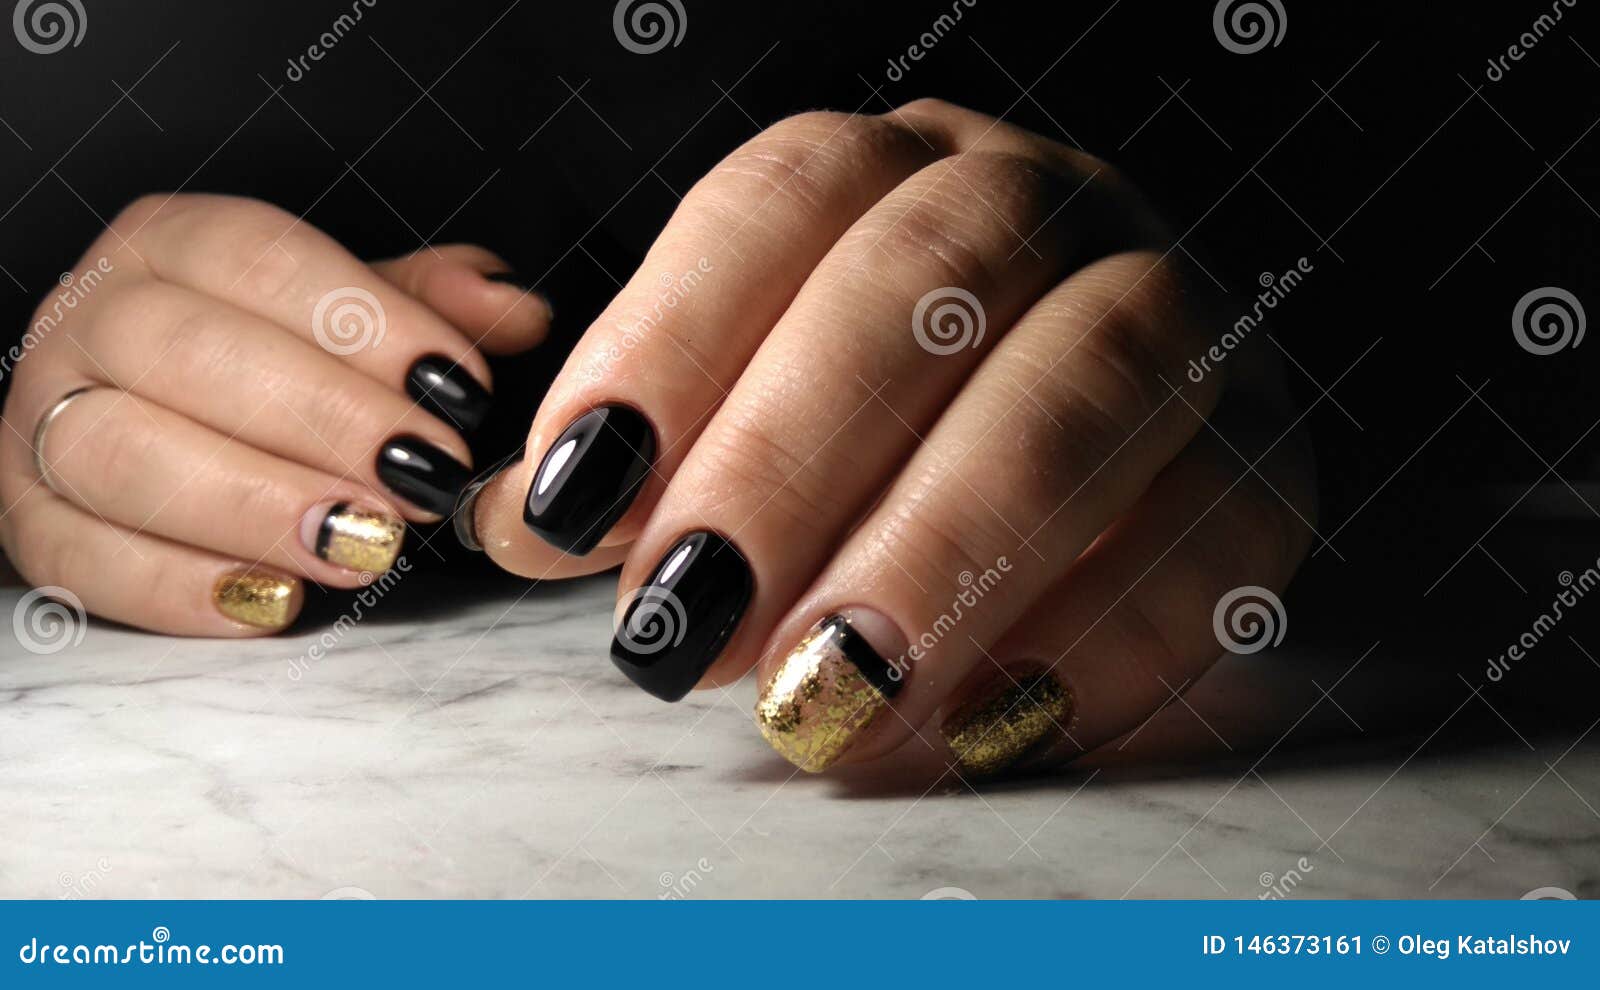 Black Manicure with Gold Design Stock Image - Image of female, beauty ...